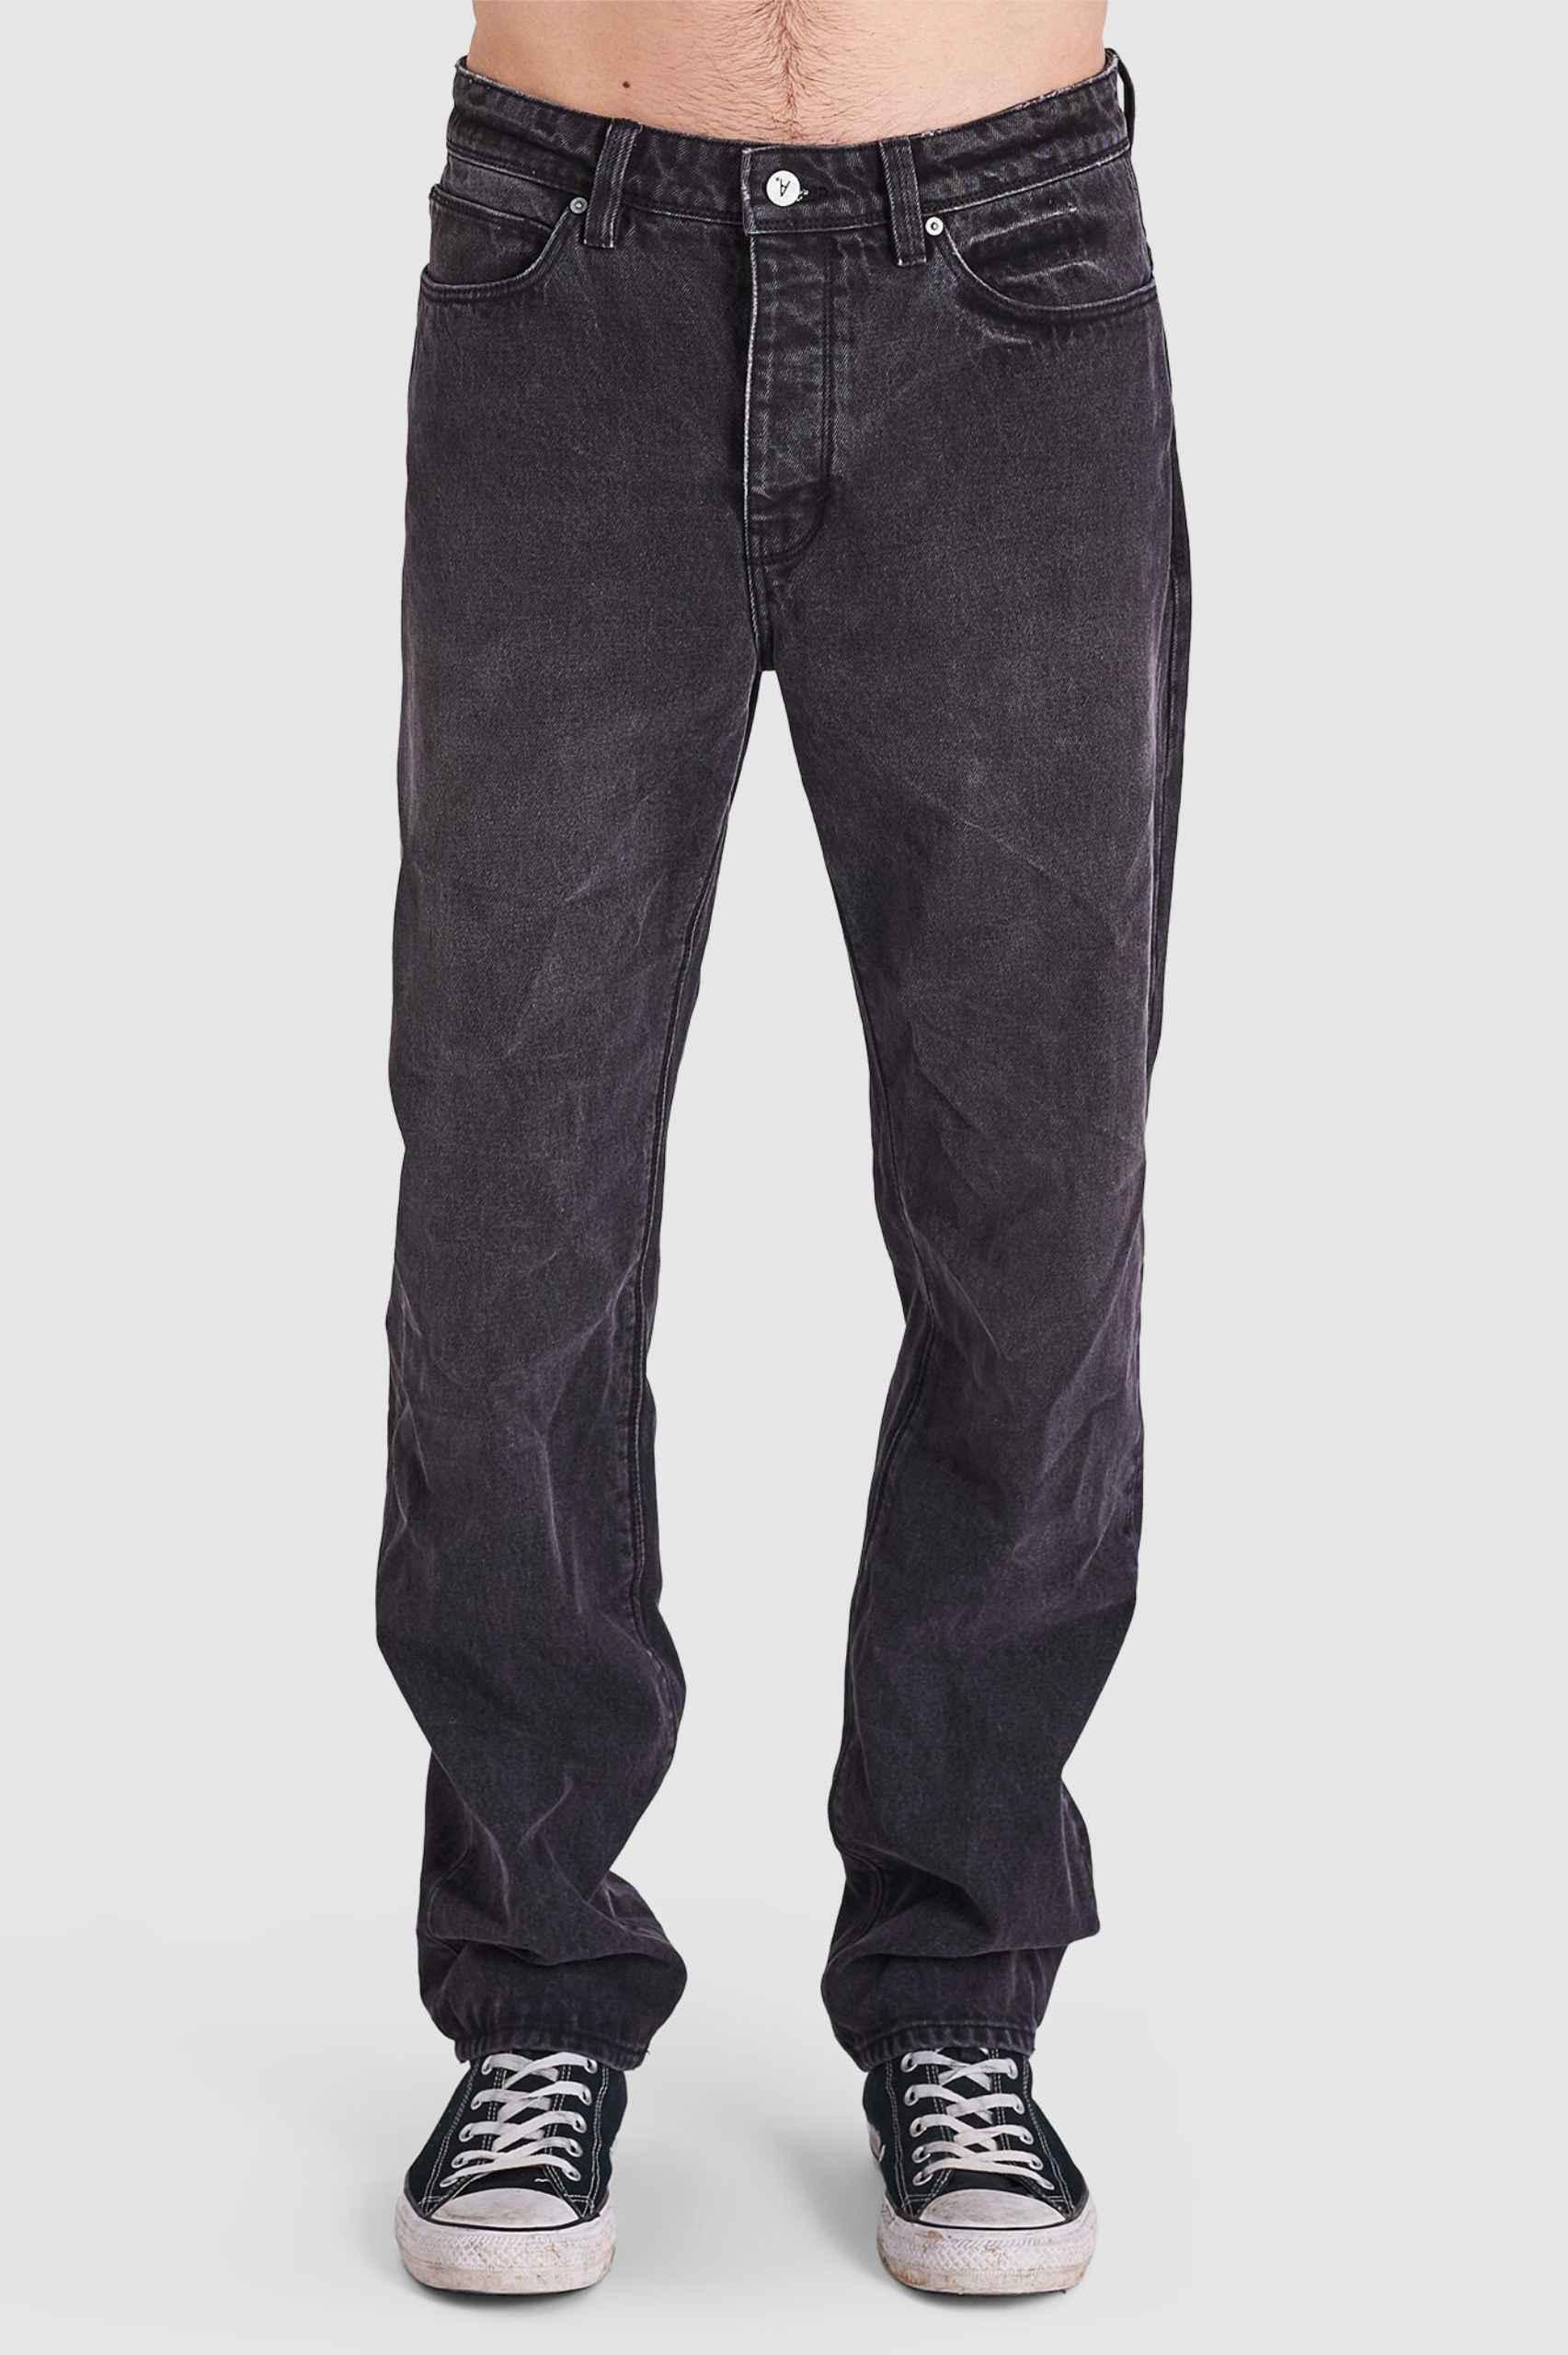 Abrand A 90s Relaxed Jeans Fade To Black